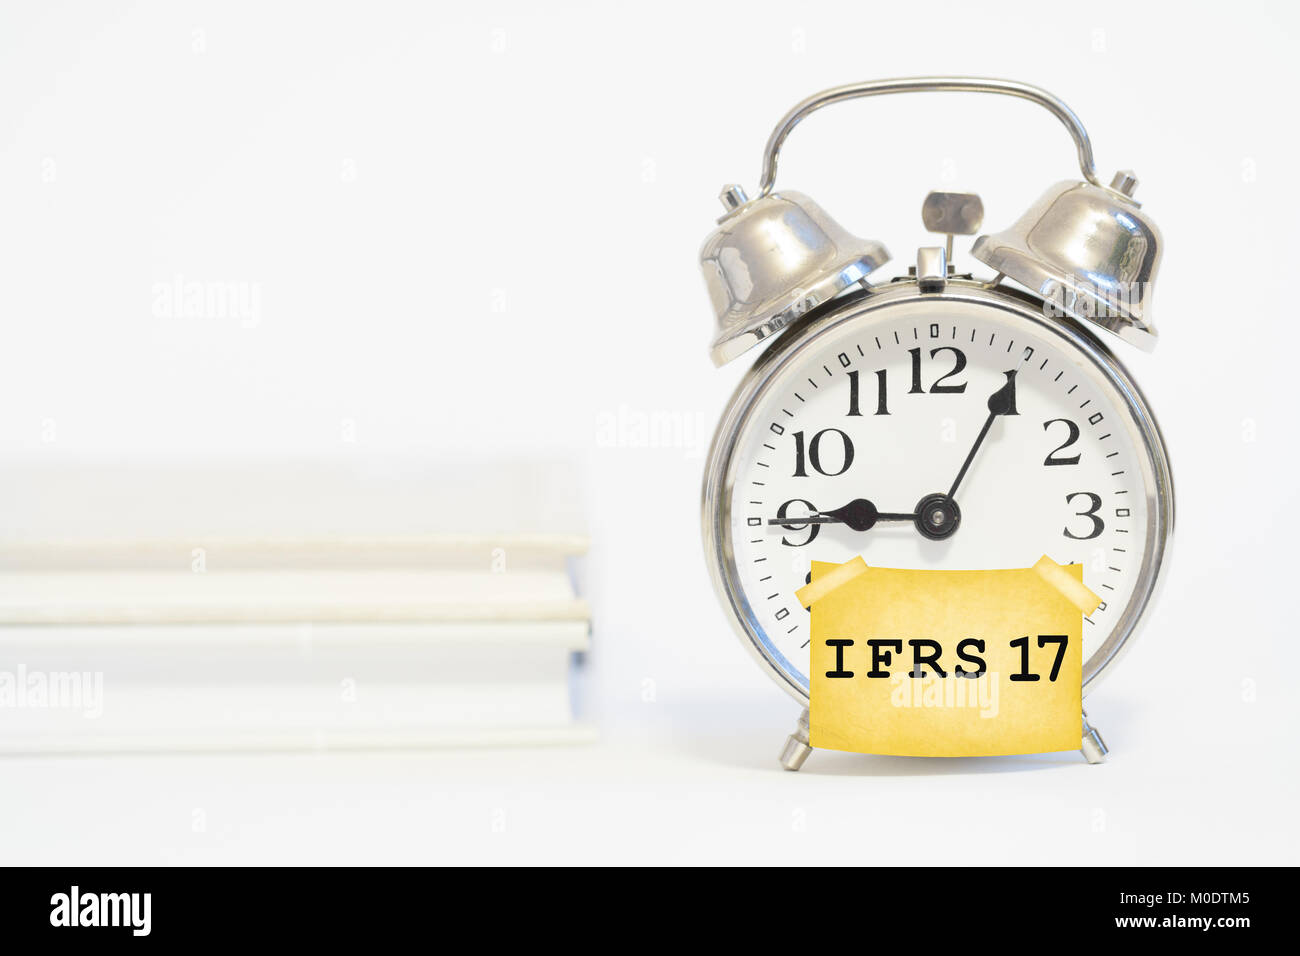 ifrs 17 insurance accounting standard concept with alarm clock Stock Photo